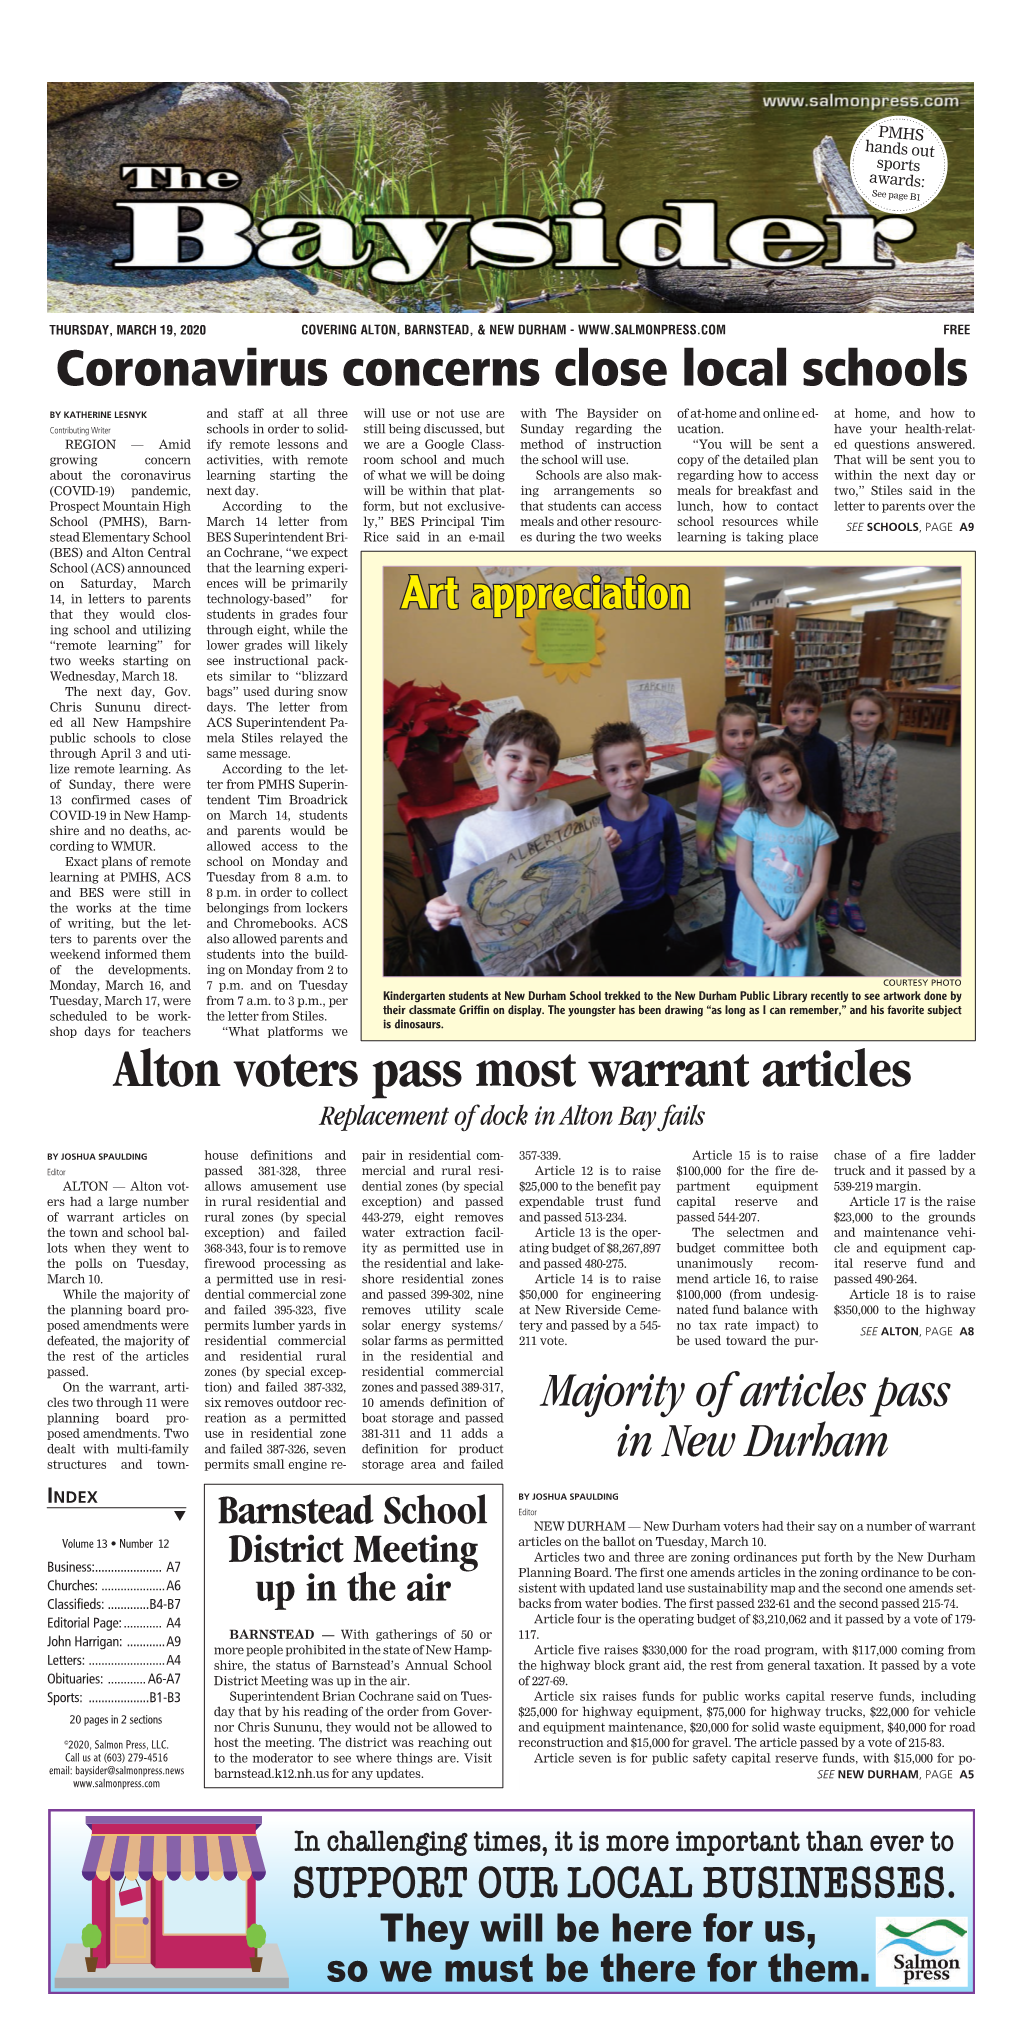 Alton Voters Pass Most Warrant Articles Replacement of Dock in Alton Bay Fails